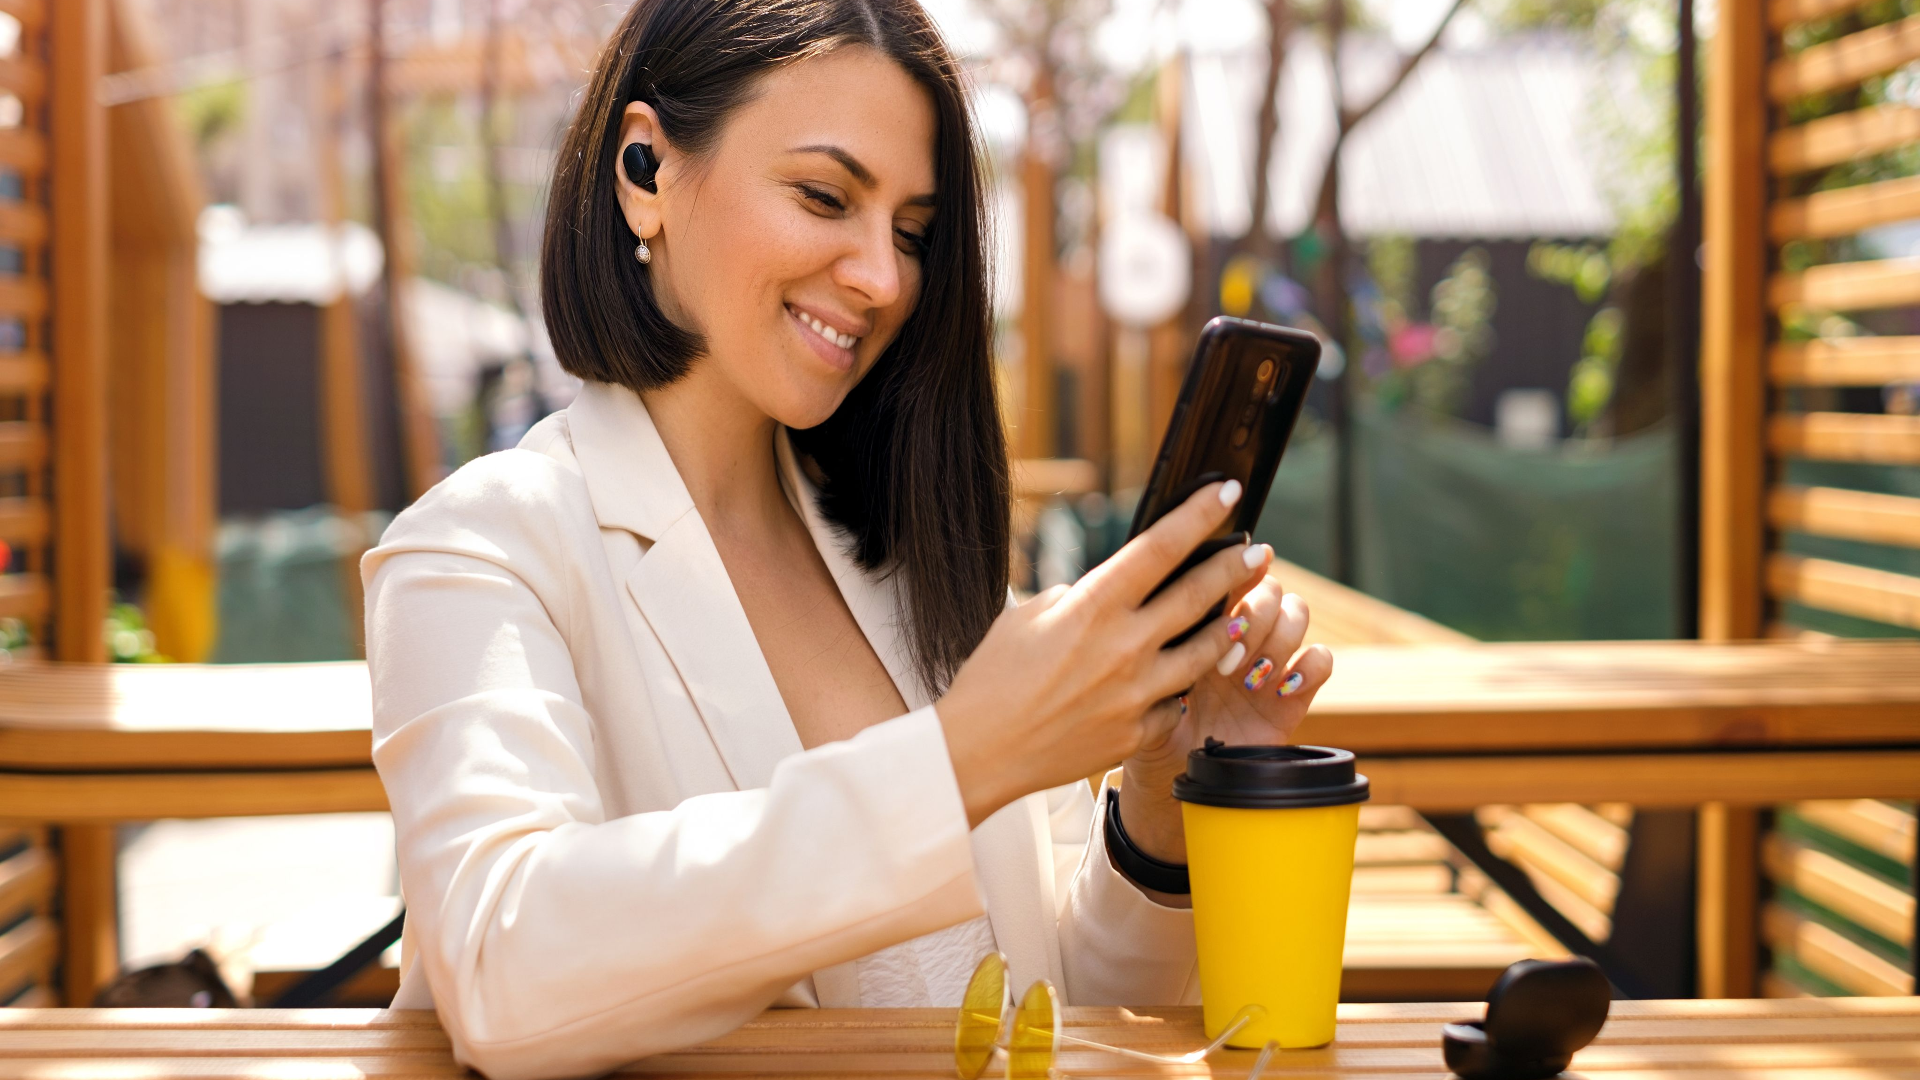 Brunette business person with small wireless black headphones in ears looks at the phone with a smile, reading messages. Person is relaxing in a cafe on the terrace enjoying music